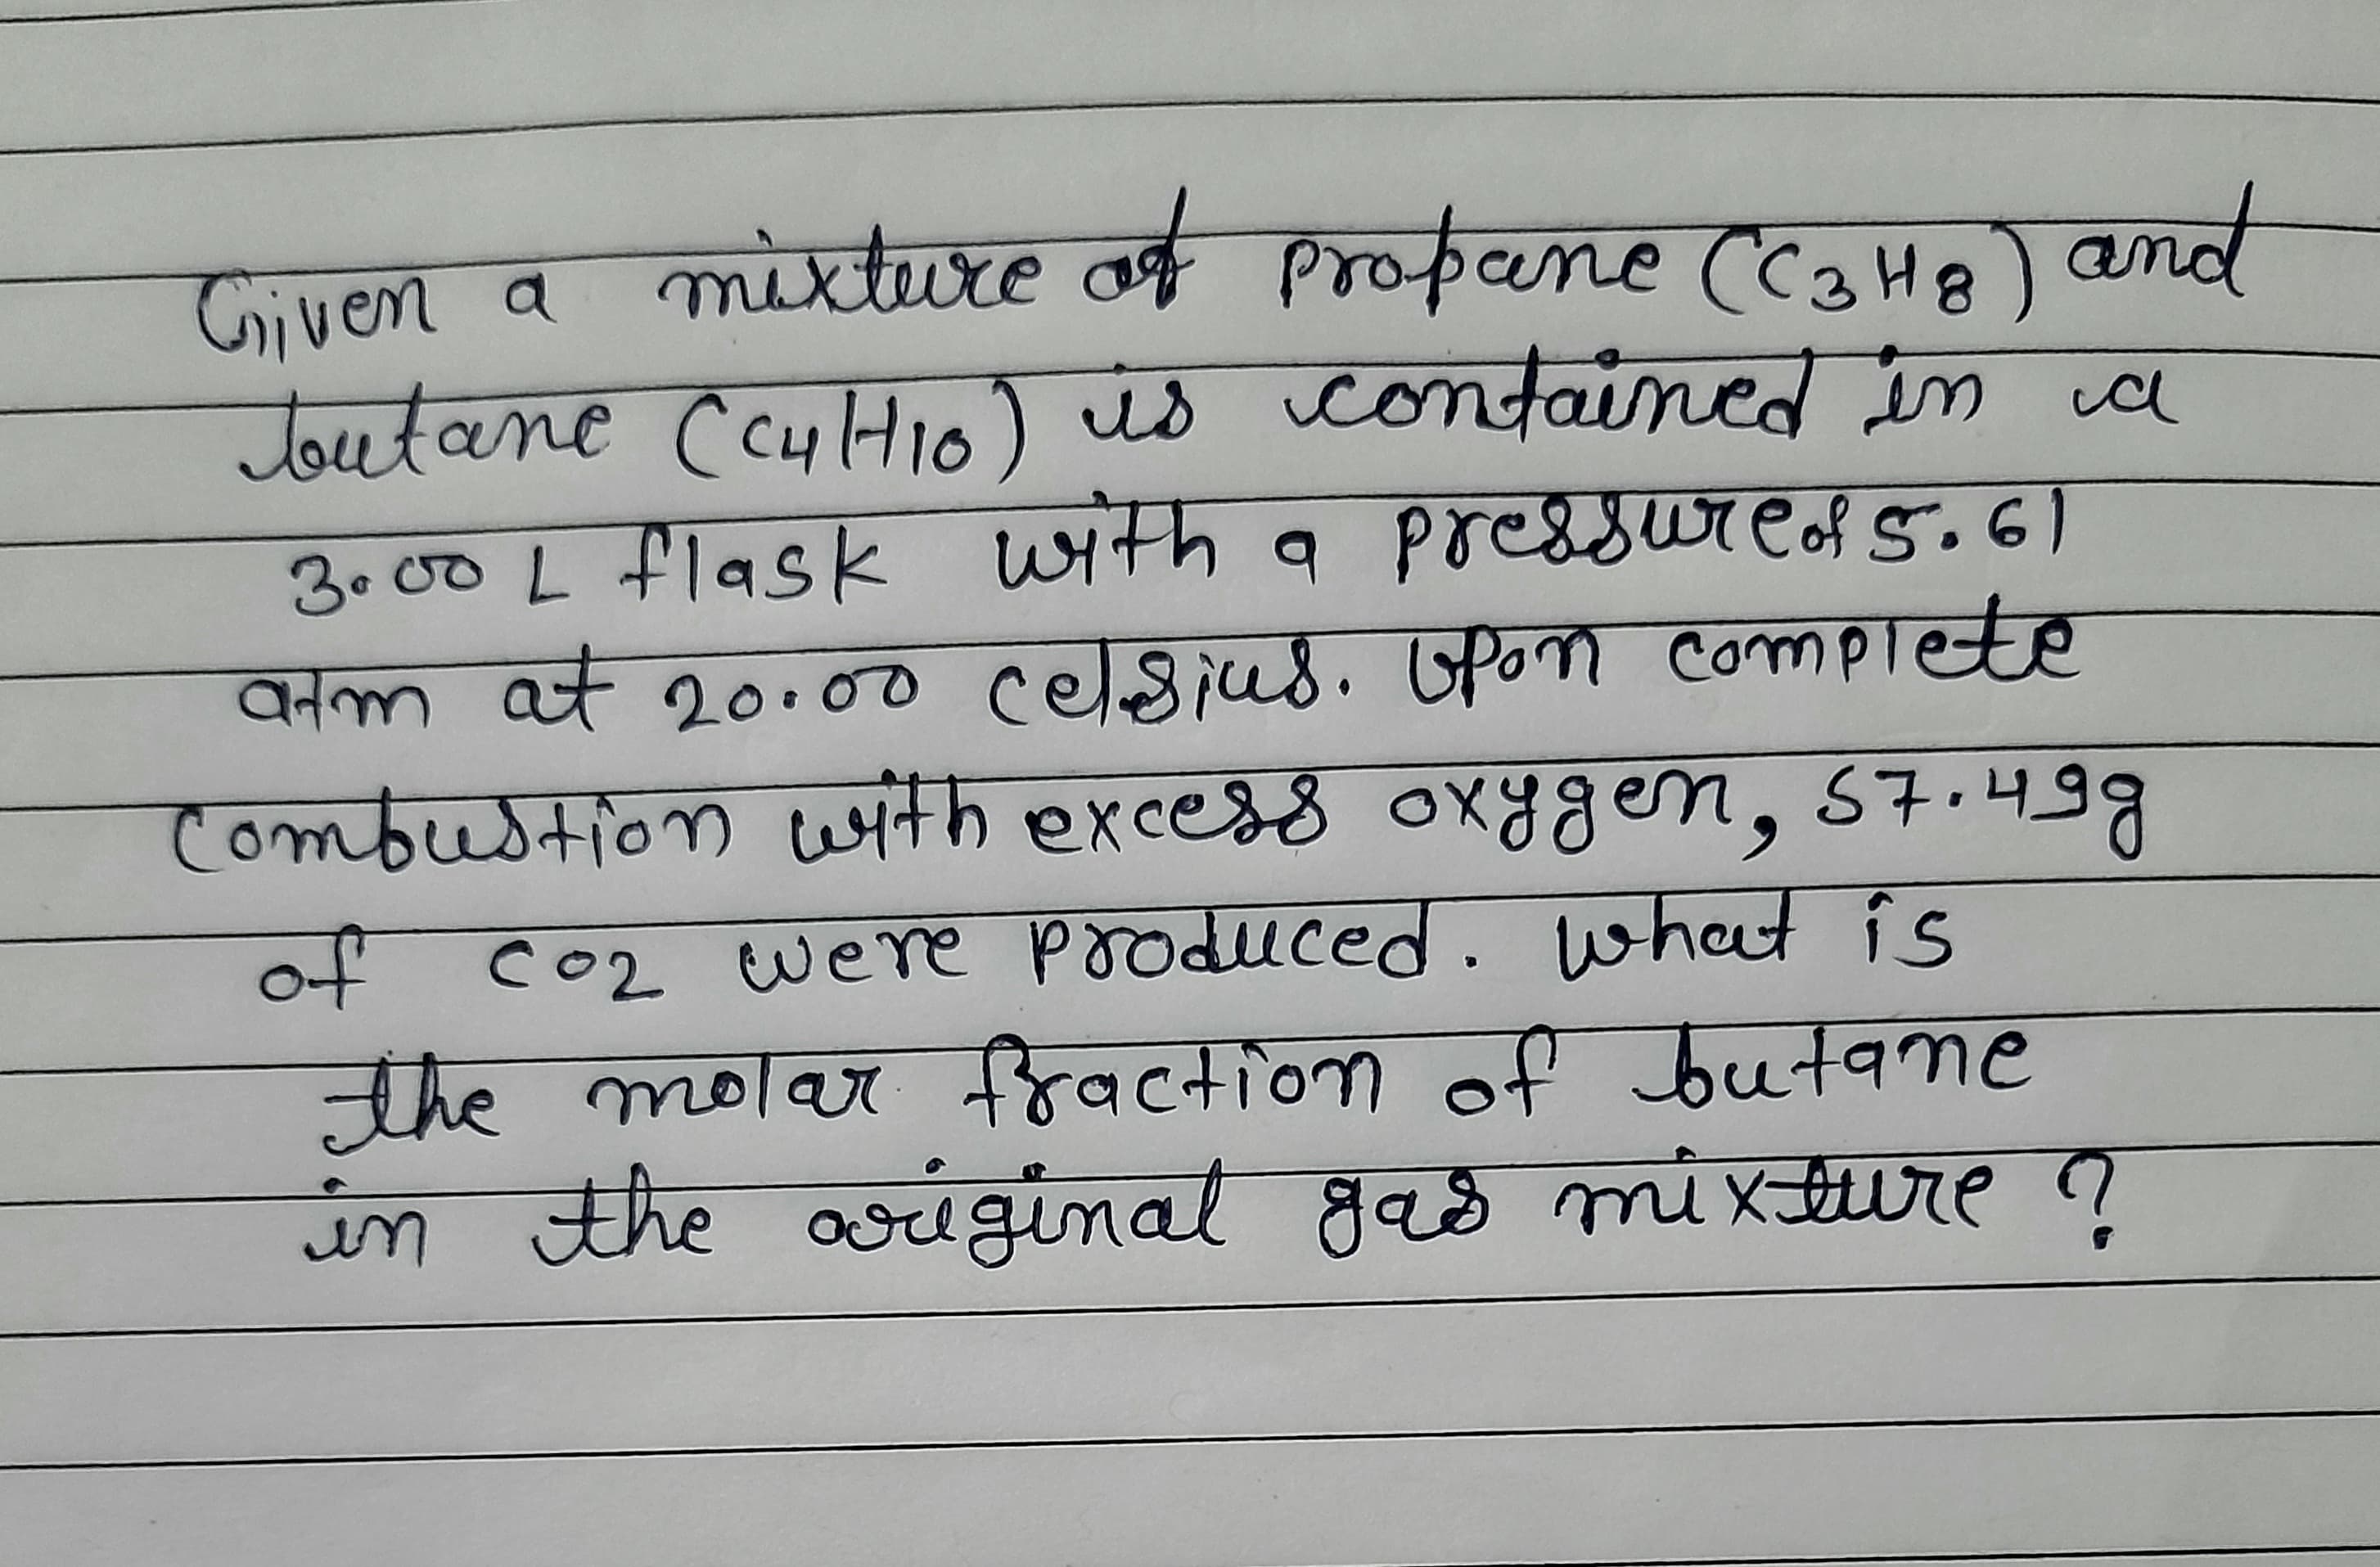 Given a mixture of propane (CaHe) and
Toutane CcyHio) is contained in ia
3.00 L flask with a poressureof 5.61
atm at 20100 celsius. Opon complete
combustion with excess oxygen, 57.4
कला
of co2 were produced. what is
नाह लठाज नहवcना०णा ०
the molar fraction of butane
in the gas mi xture ?
ariginal
